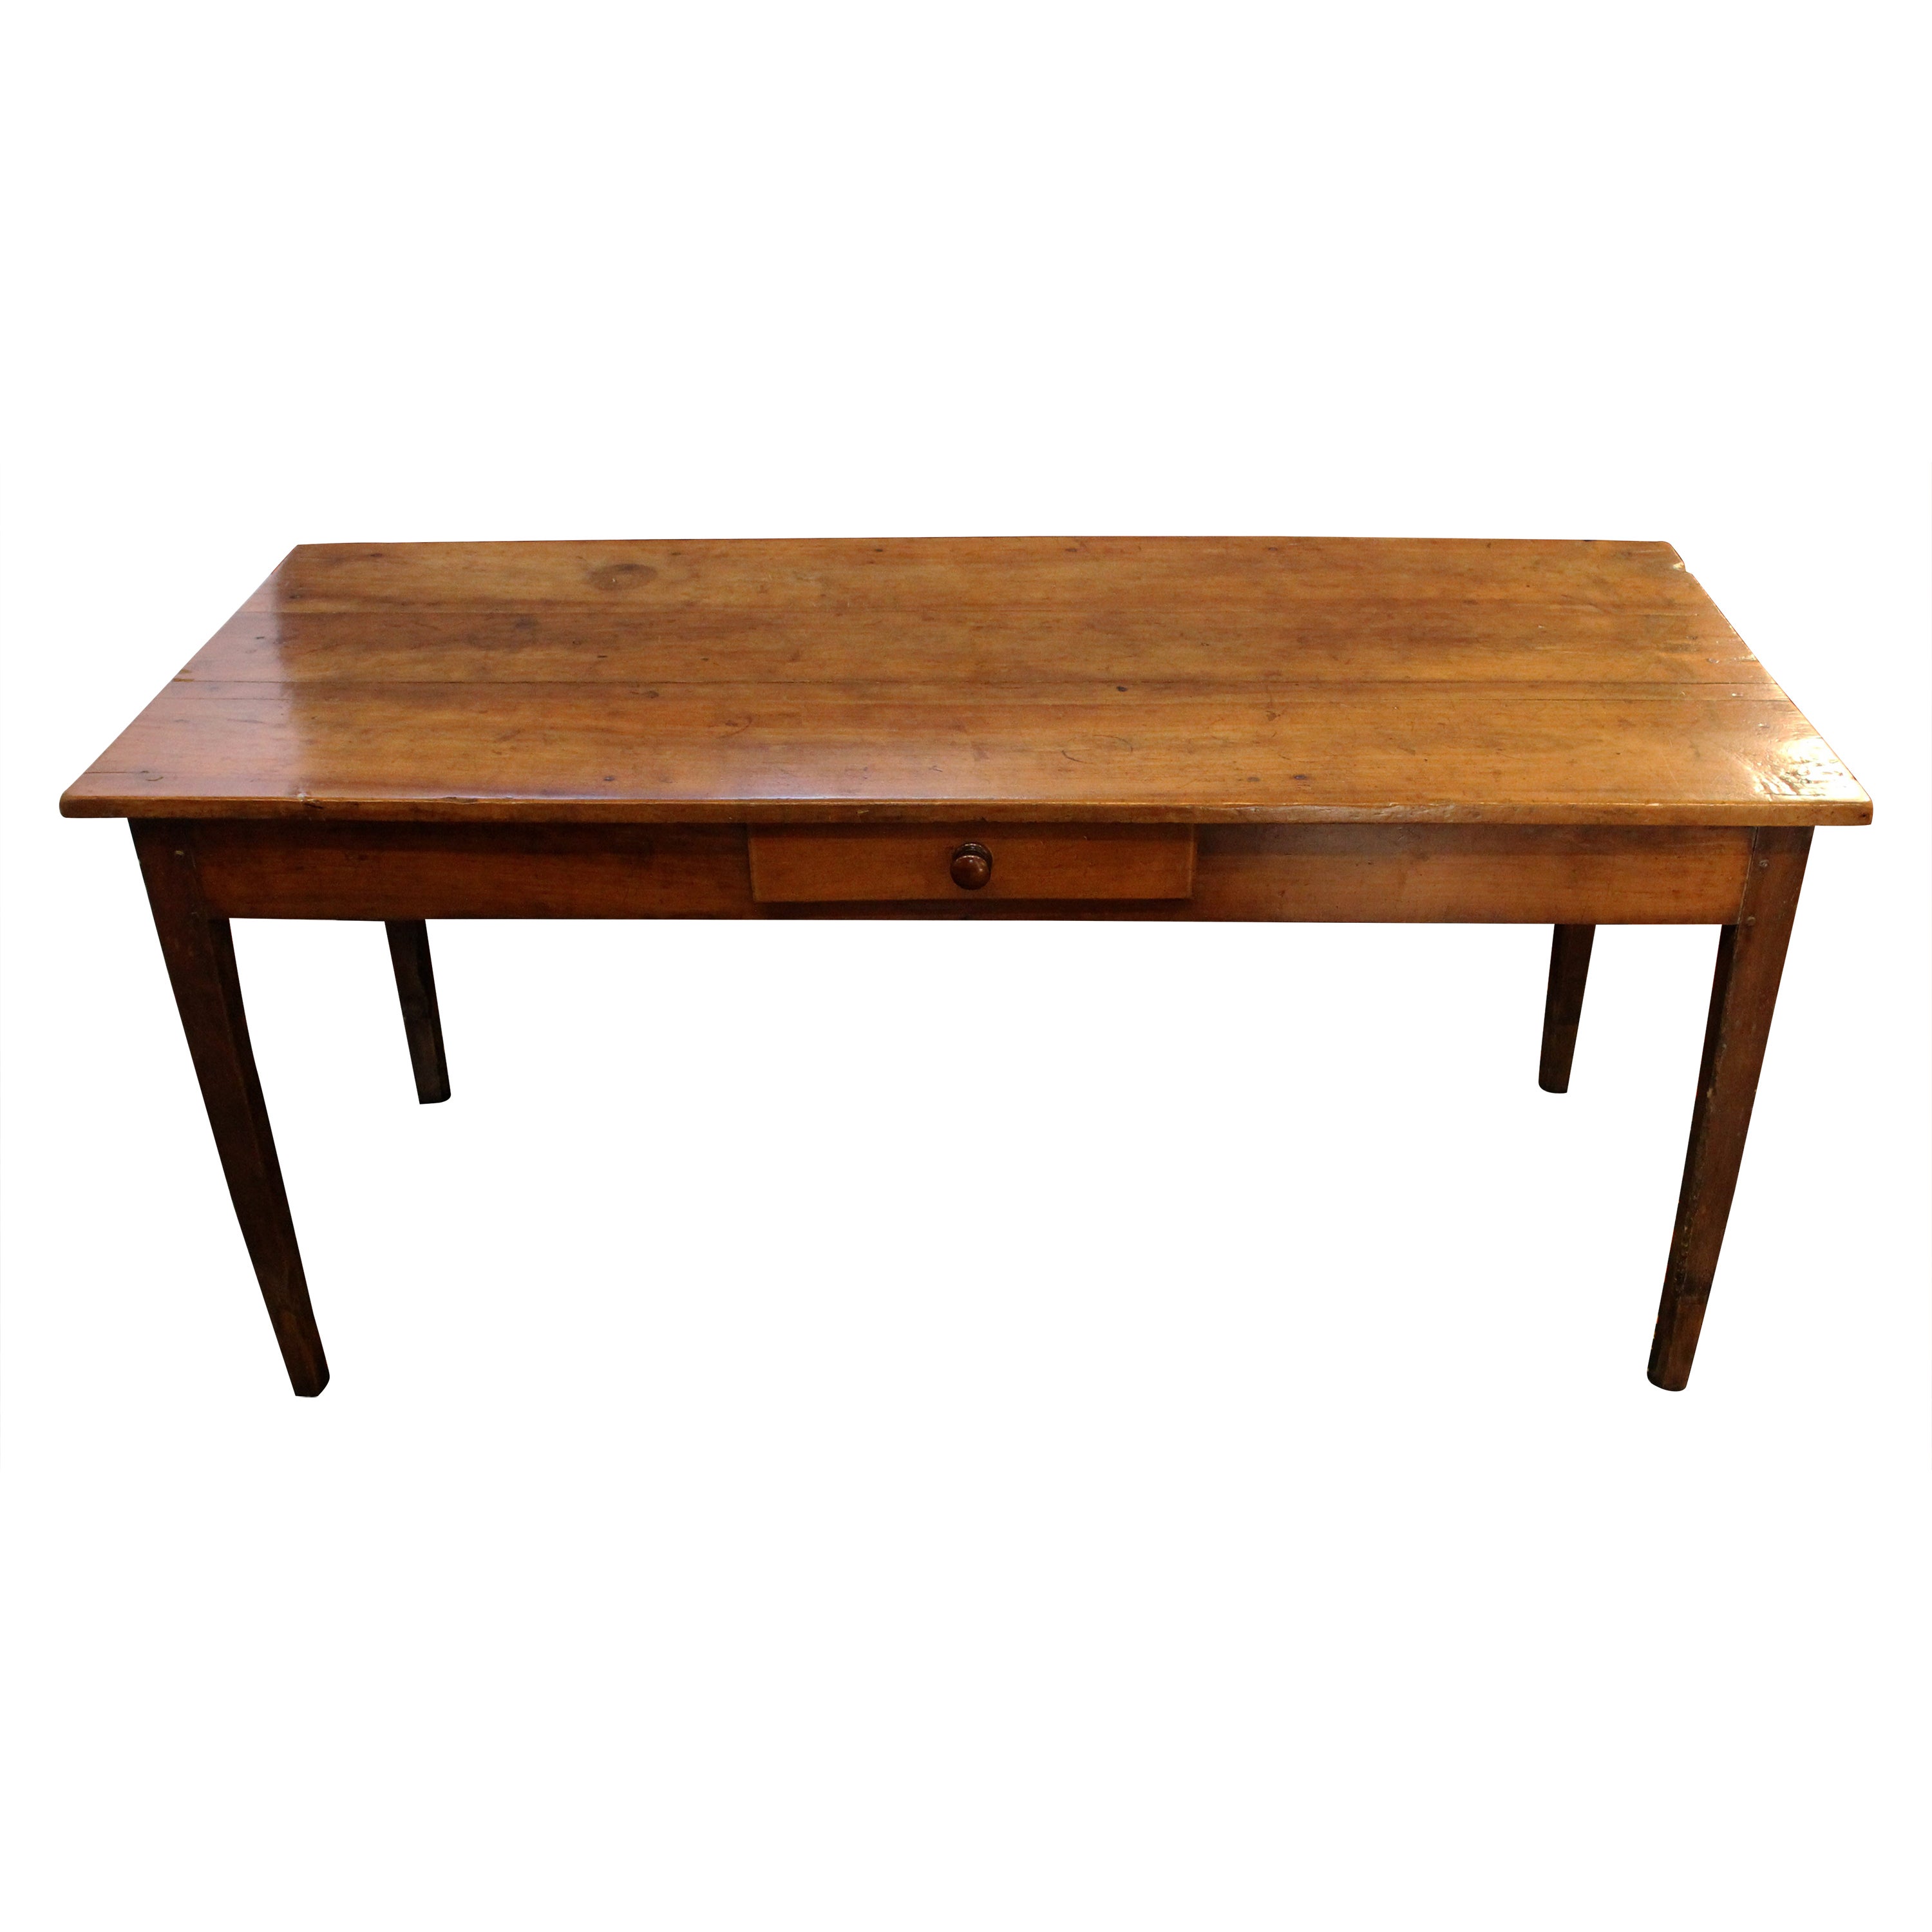 c. 1800 Country French Fruitwood Farm Table For Sale